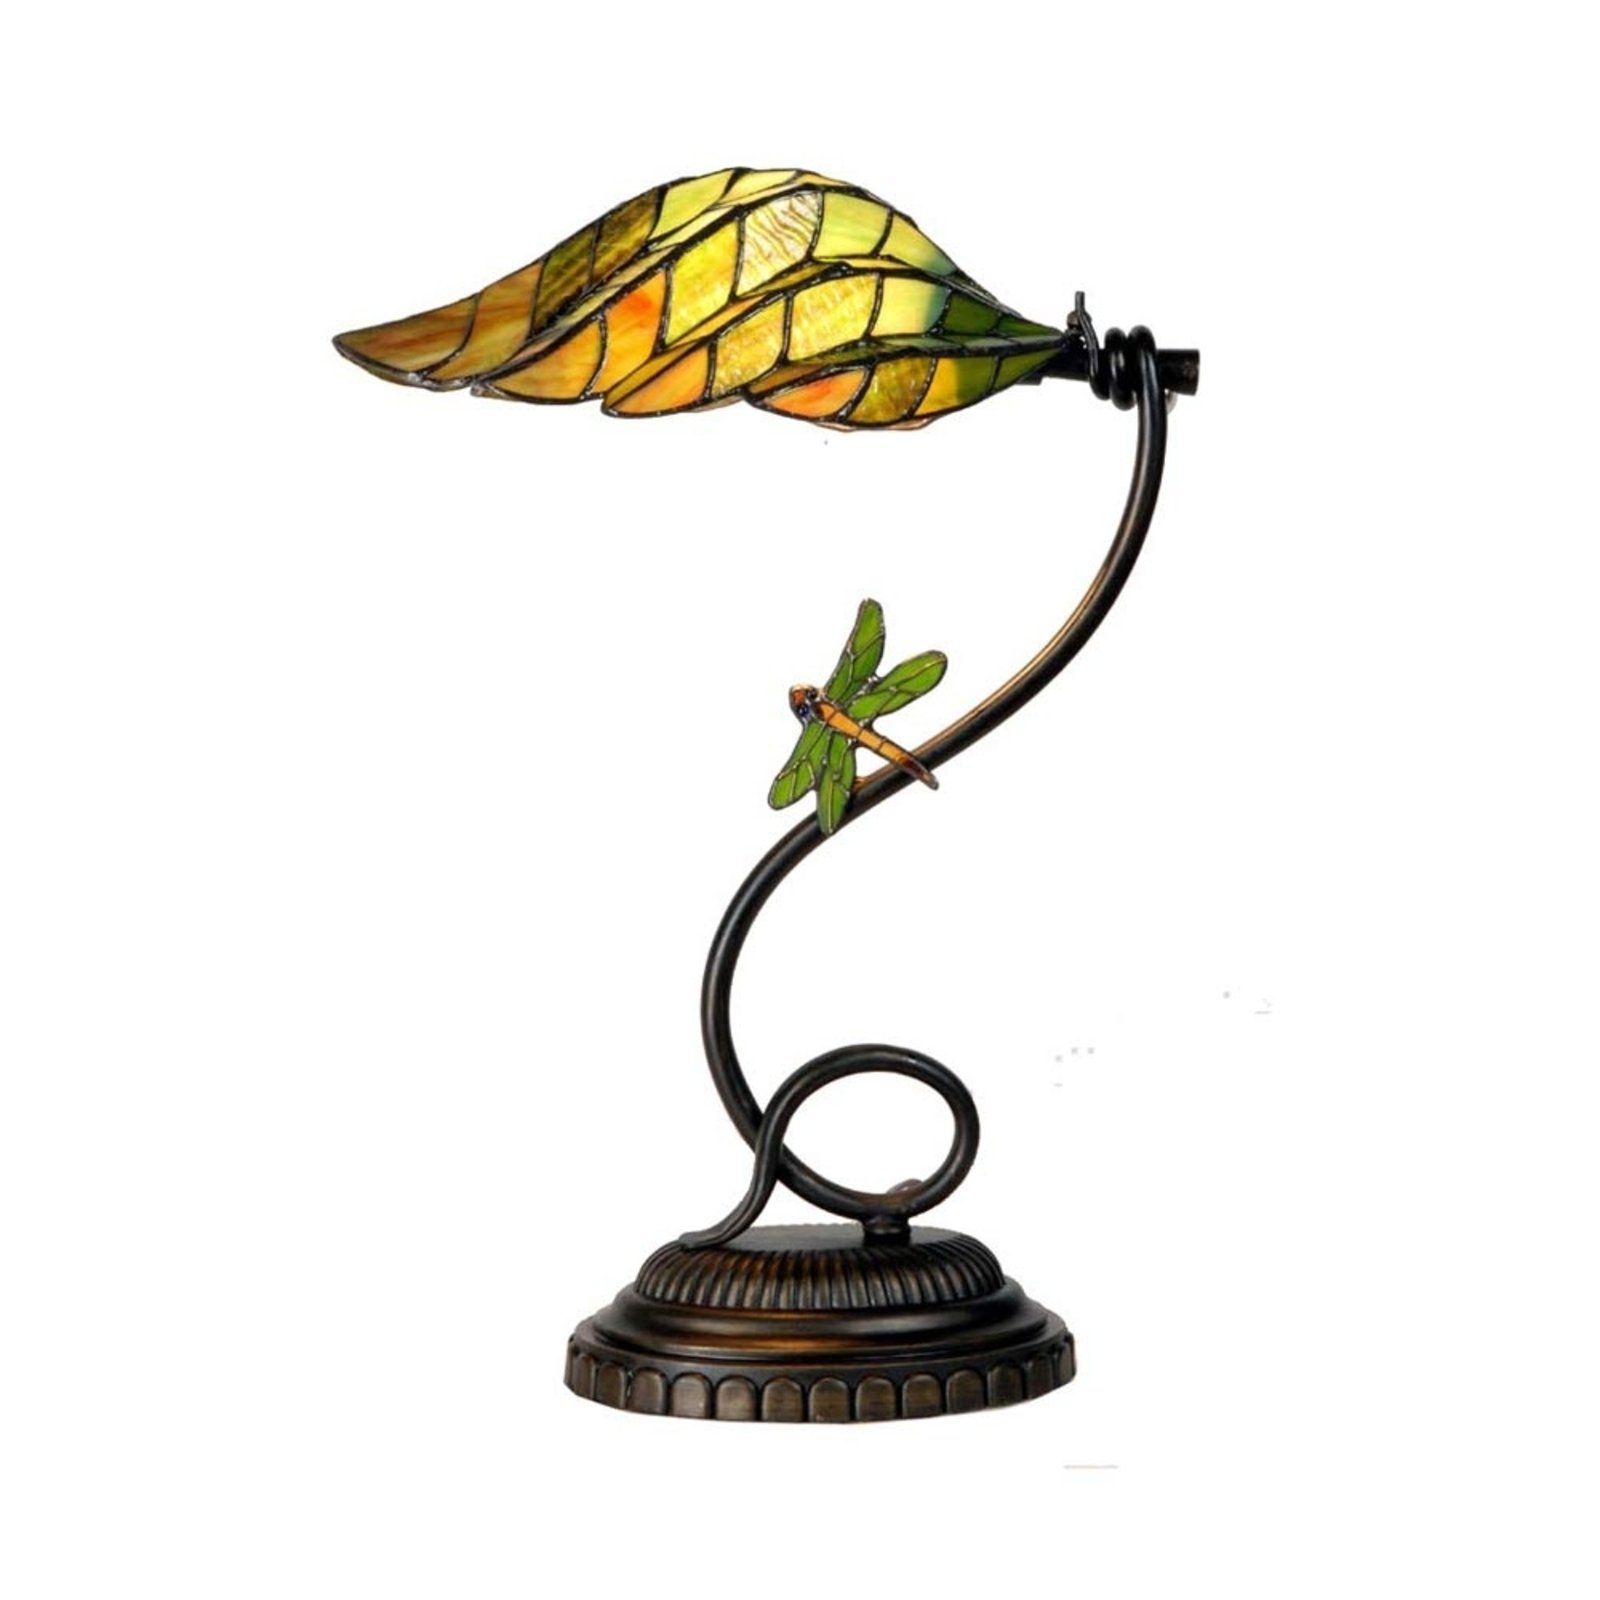 Leaf - aesthetic table lamp in the Tiffany style